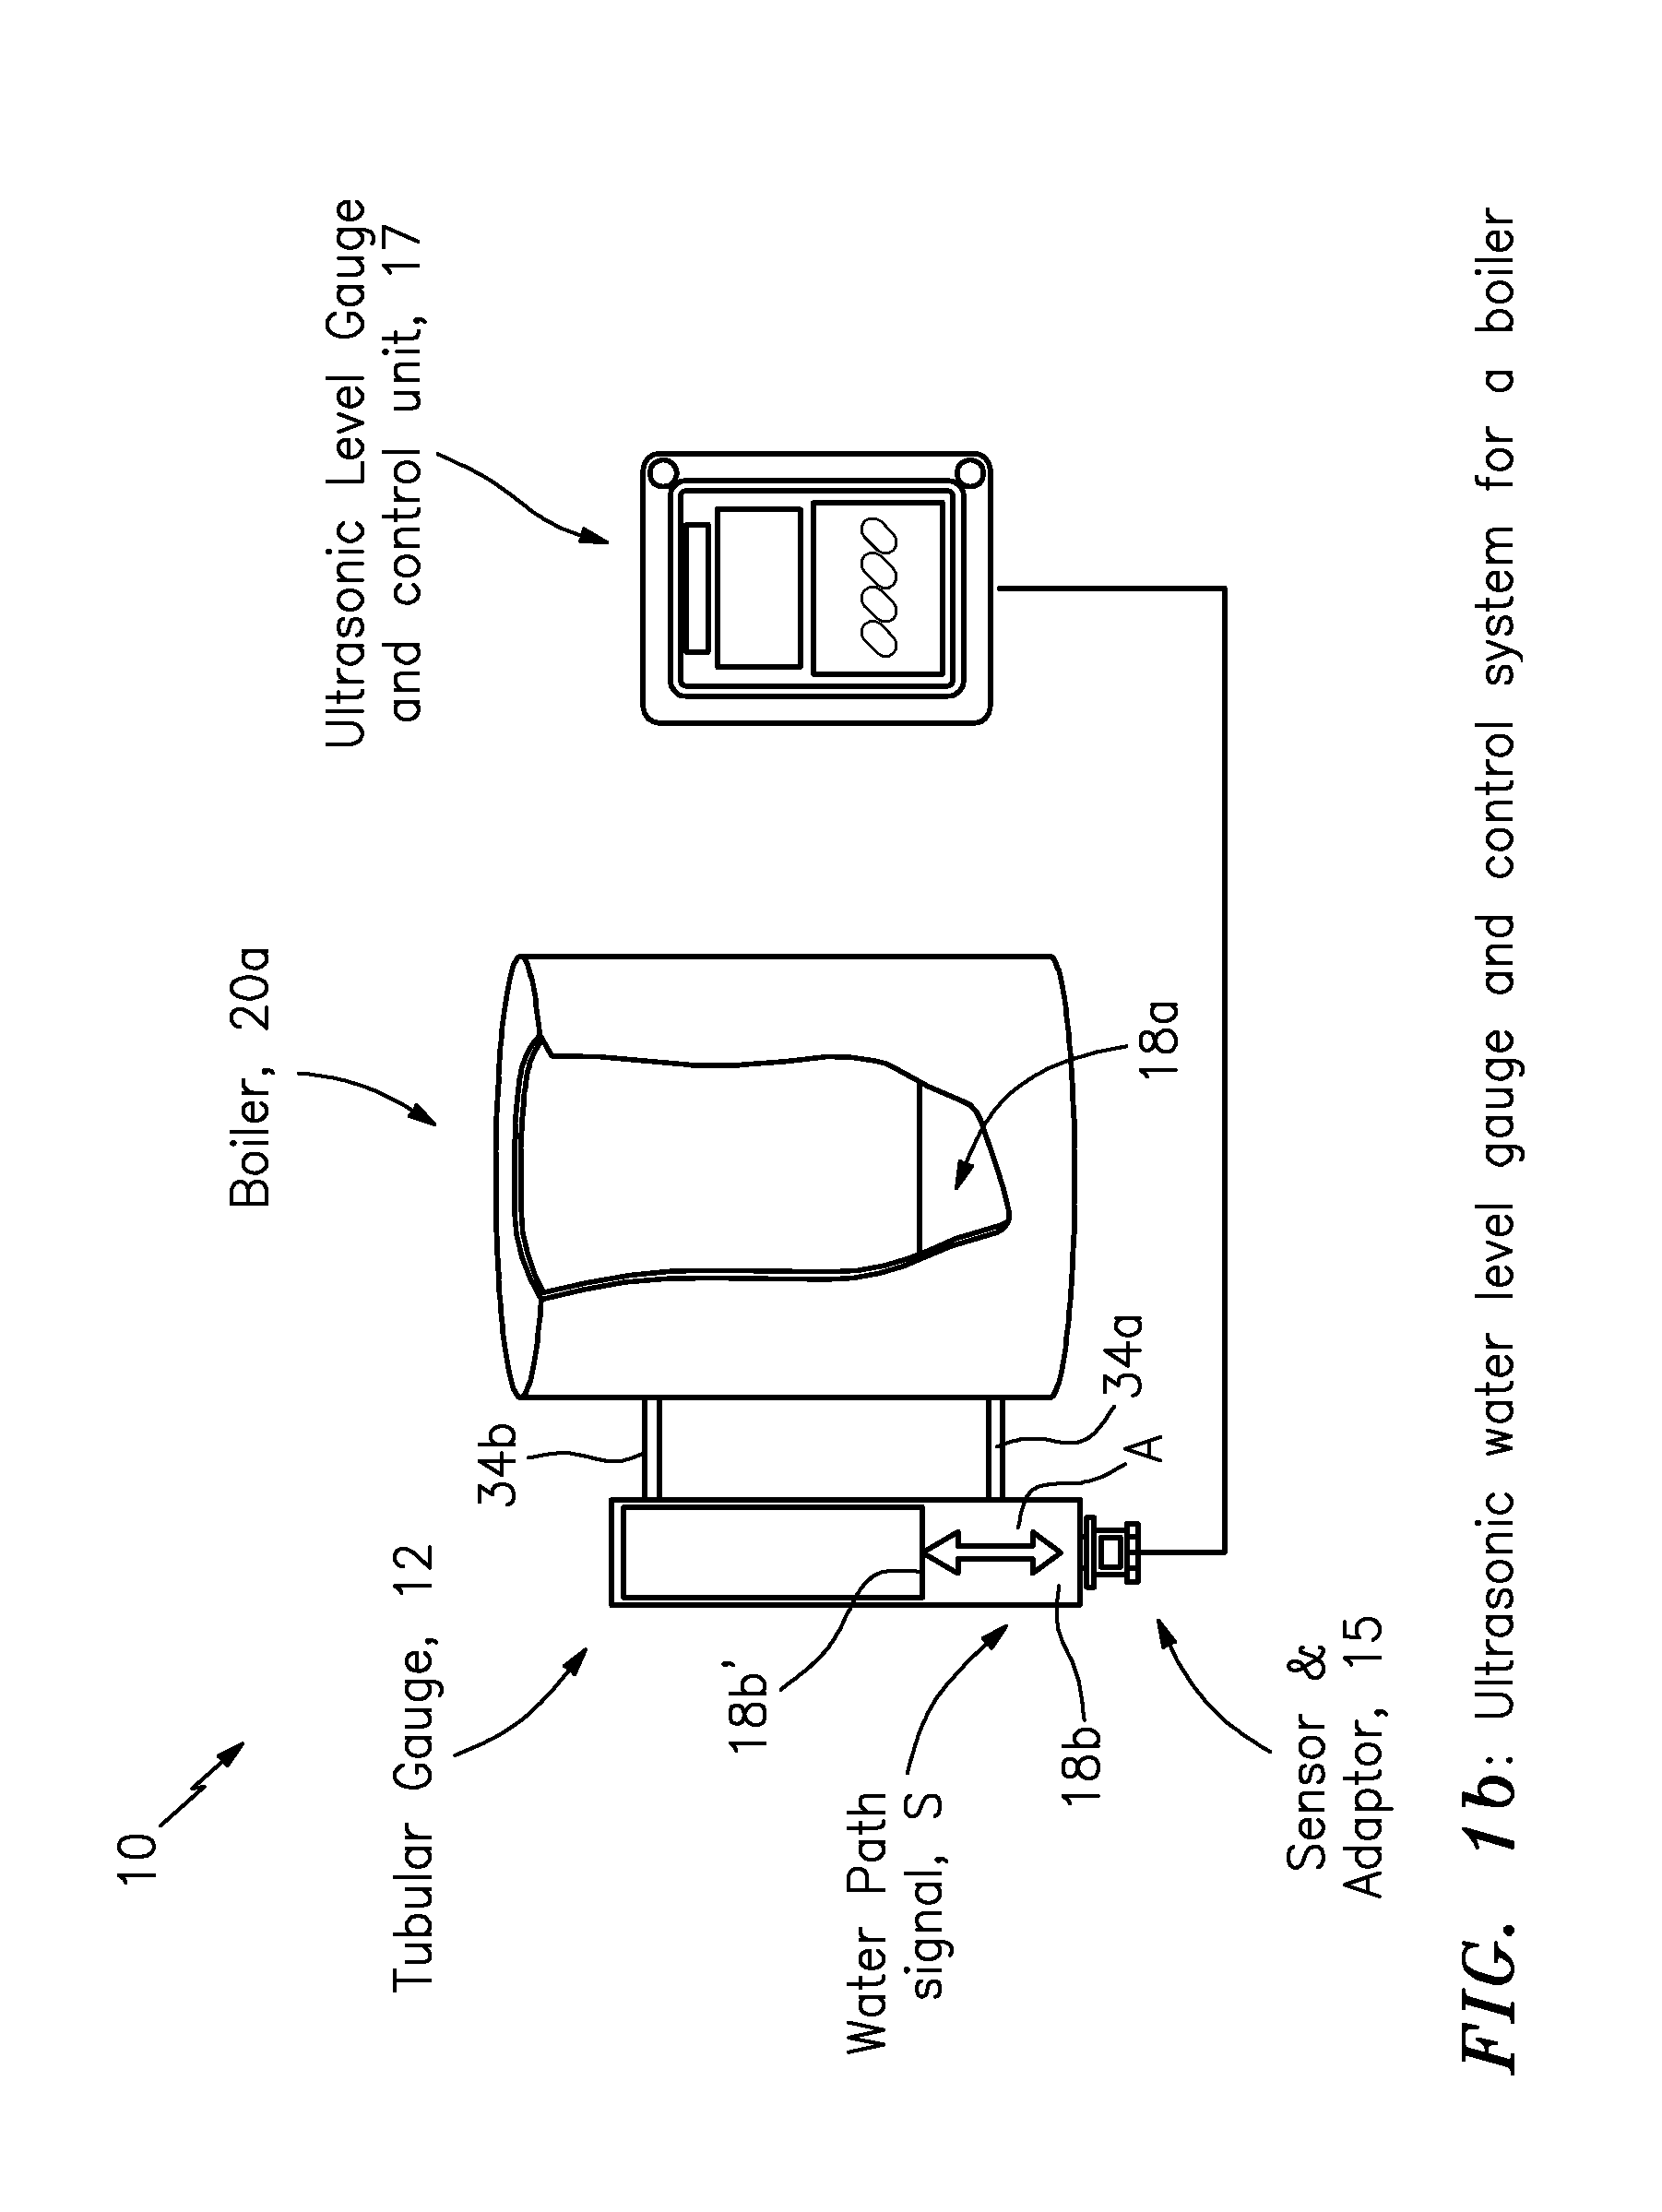 Ultrasonic water level gauge and control device